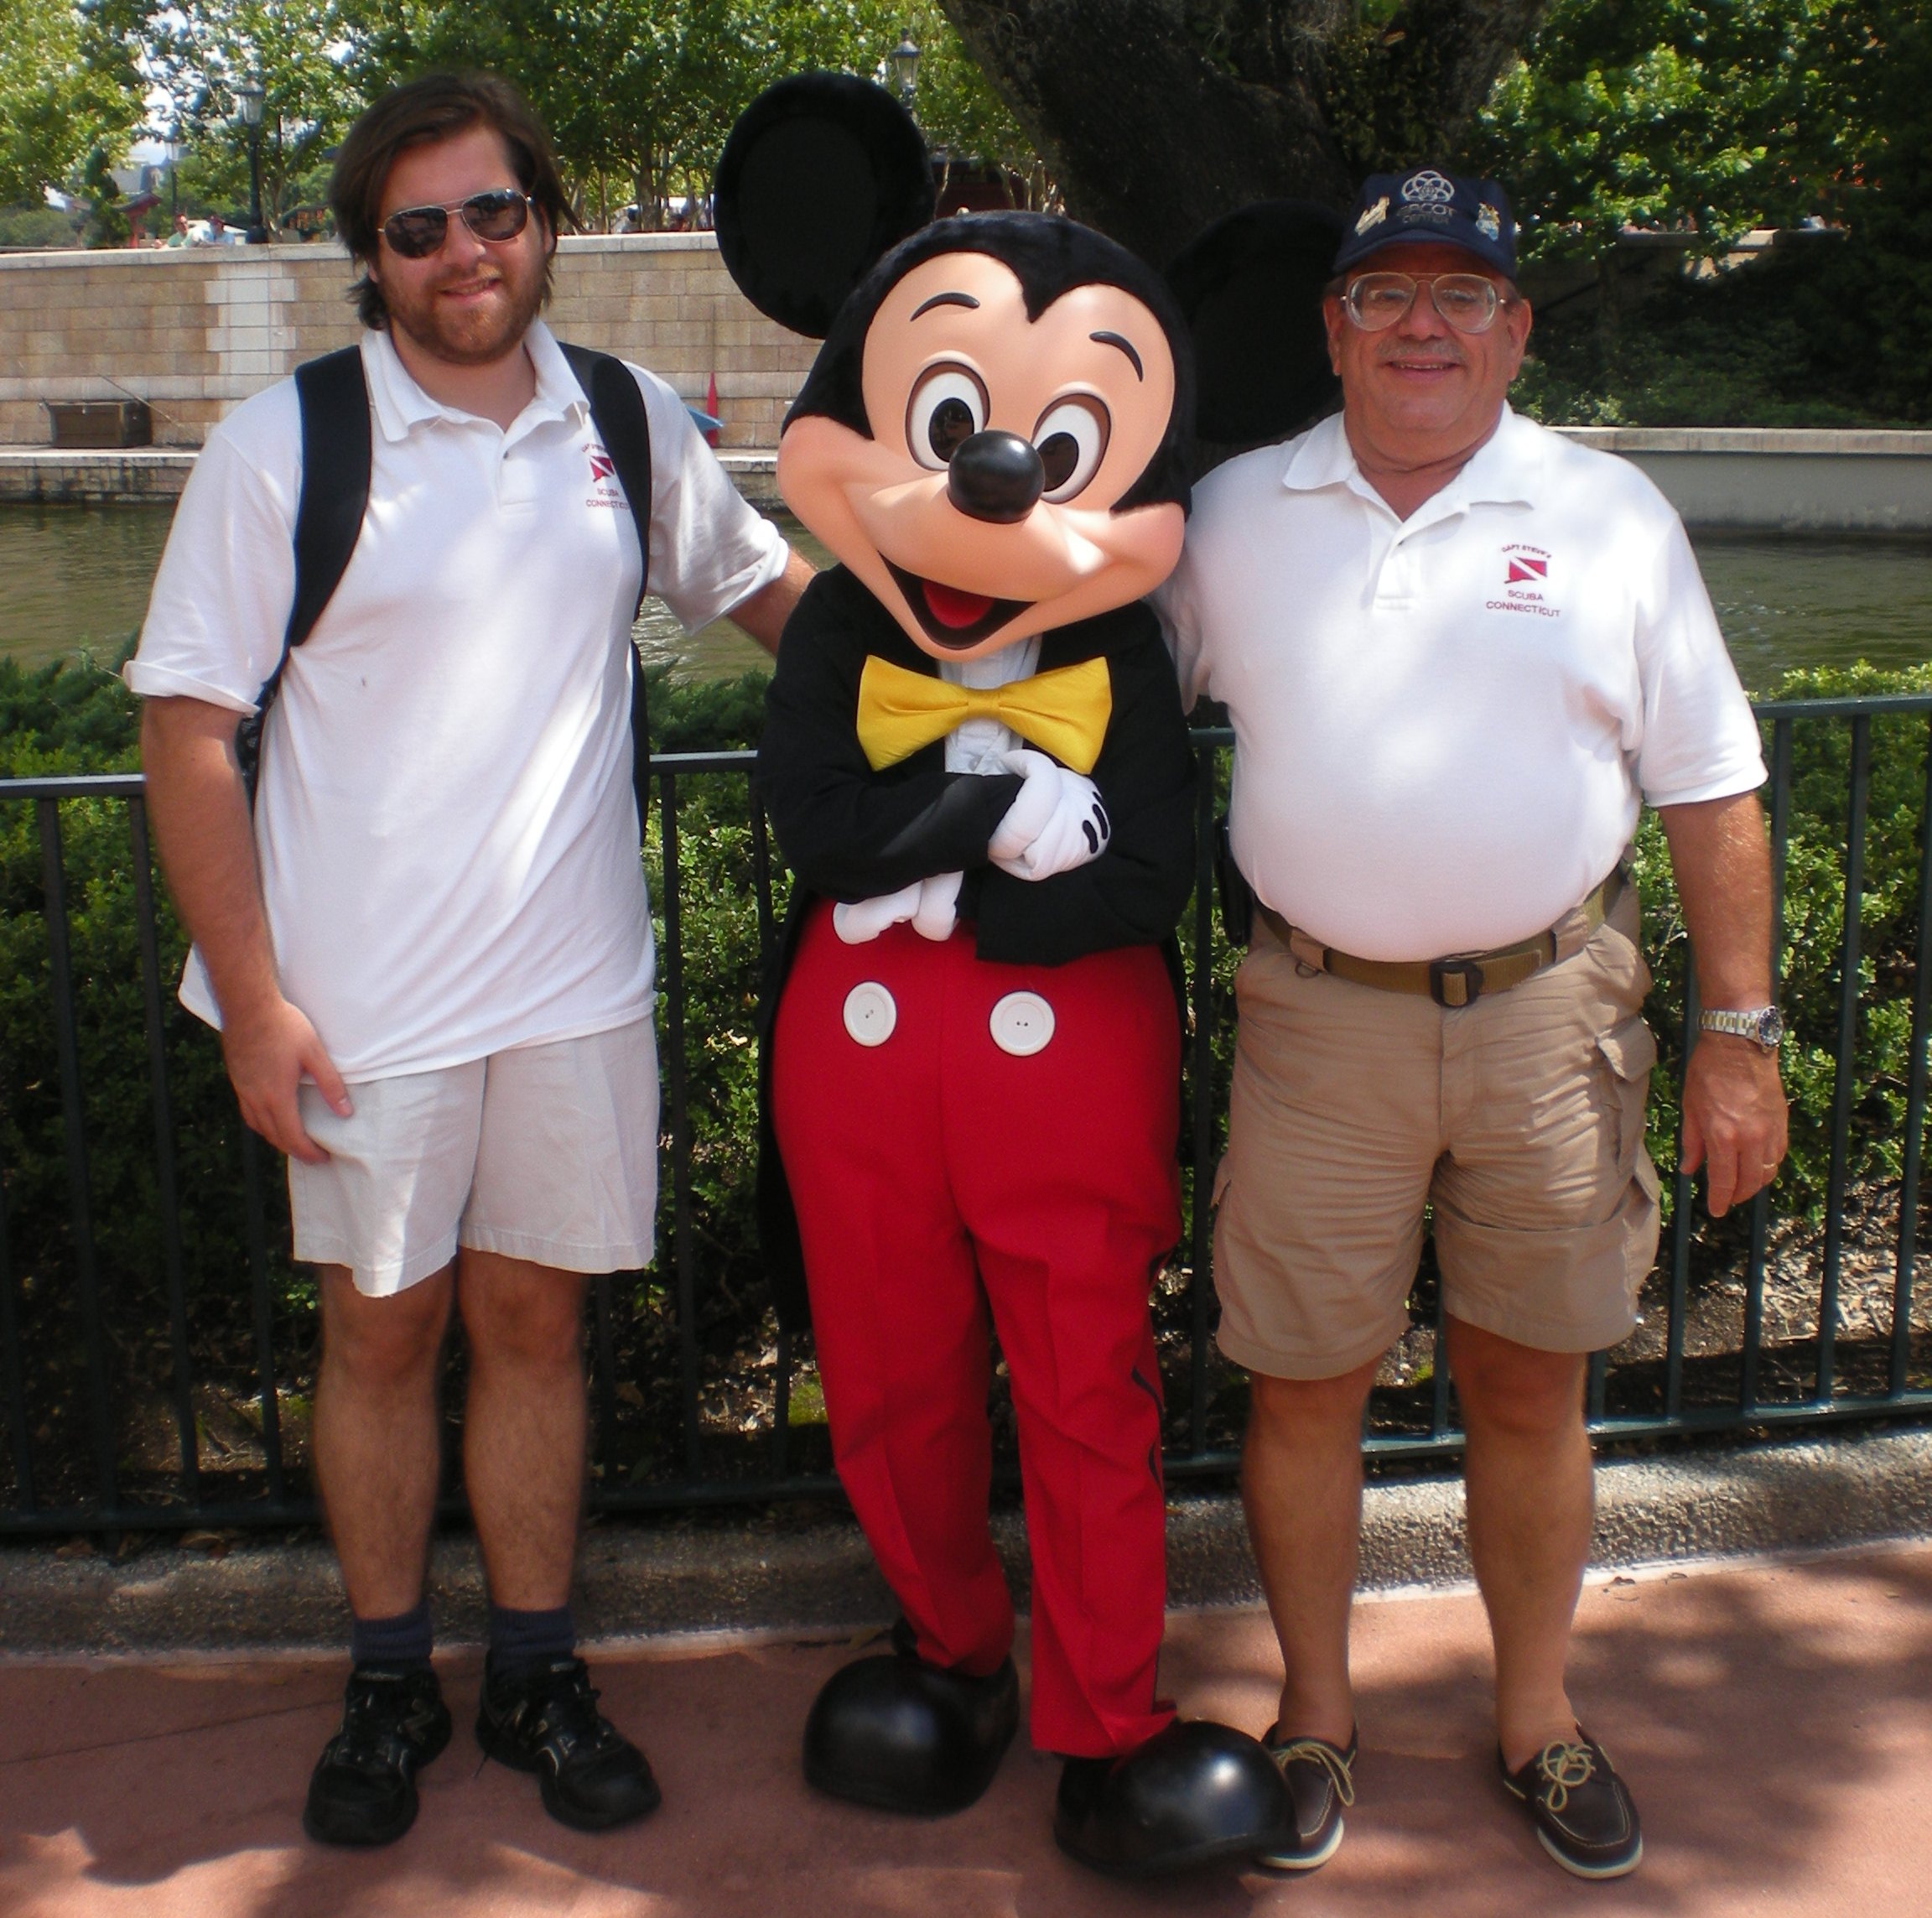 Steve and Eddie with Mickey Mouse at Walt Disney World Resort